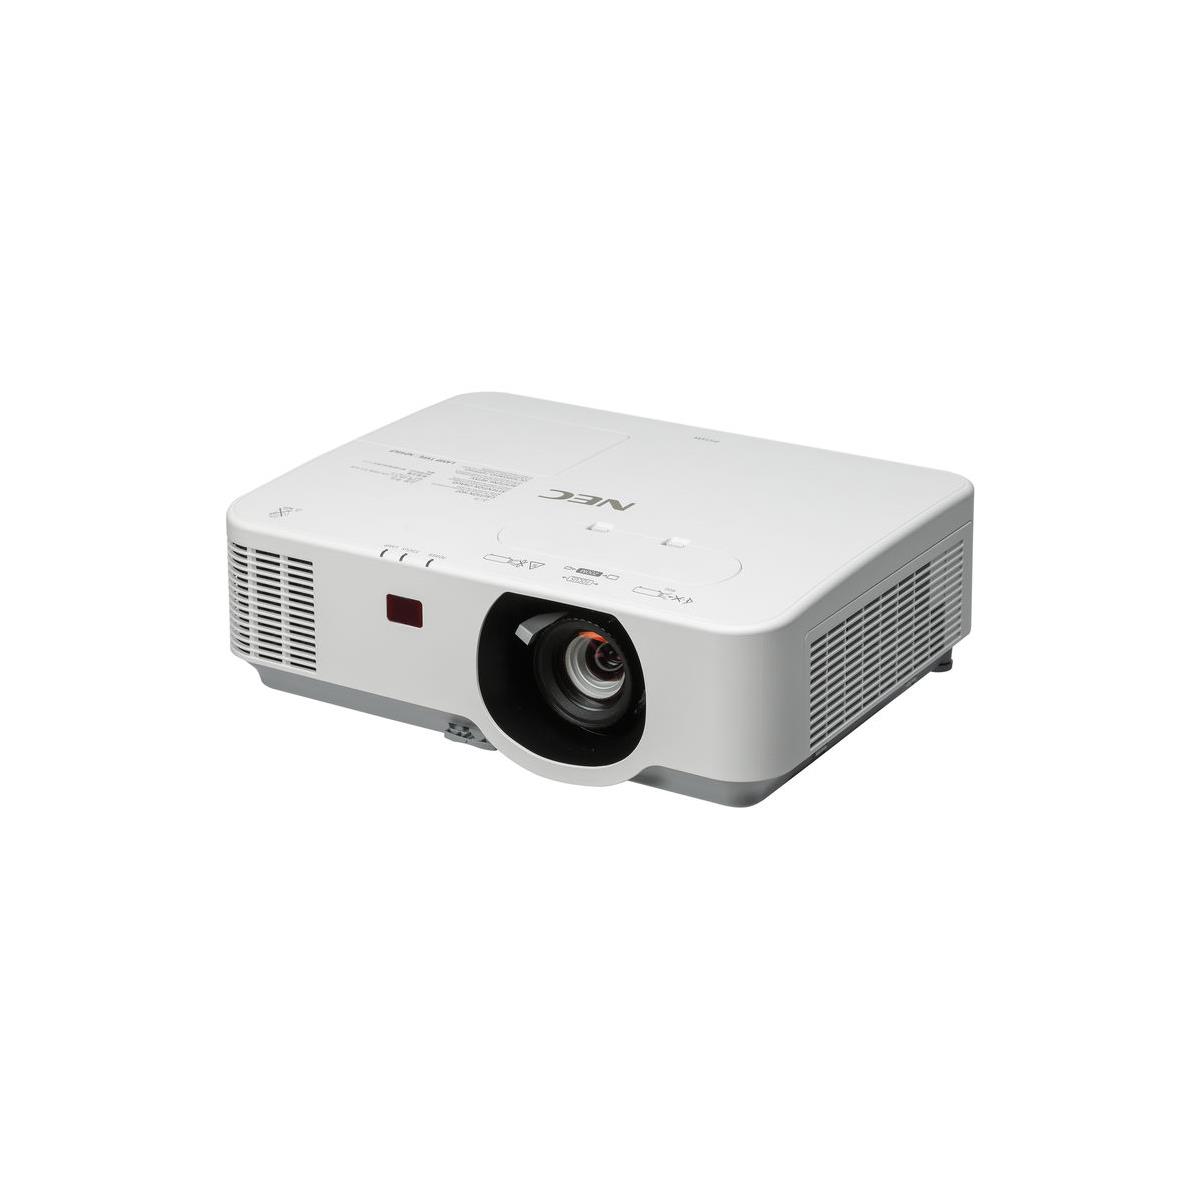 WXGA LCD Entry-Level Professional Installation Projector, White - NEC NP-P554W